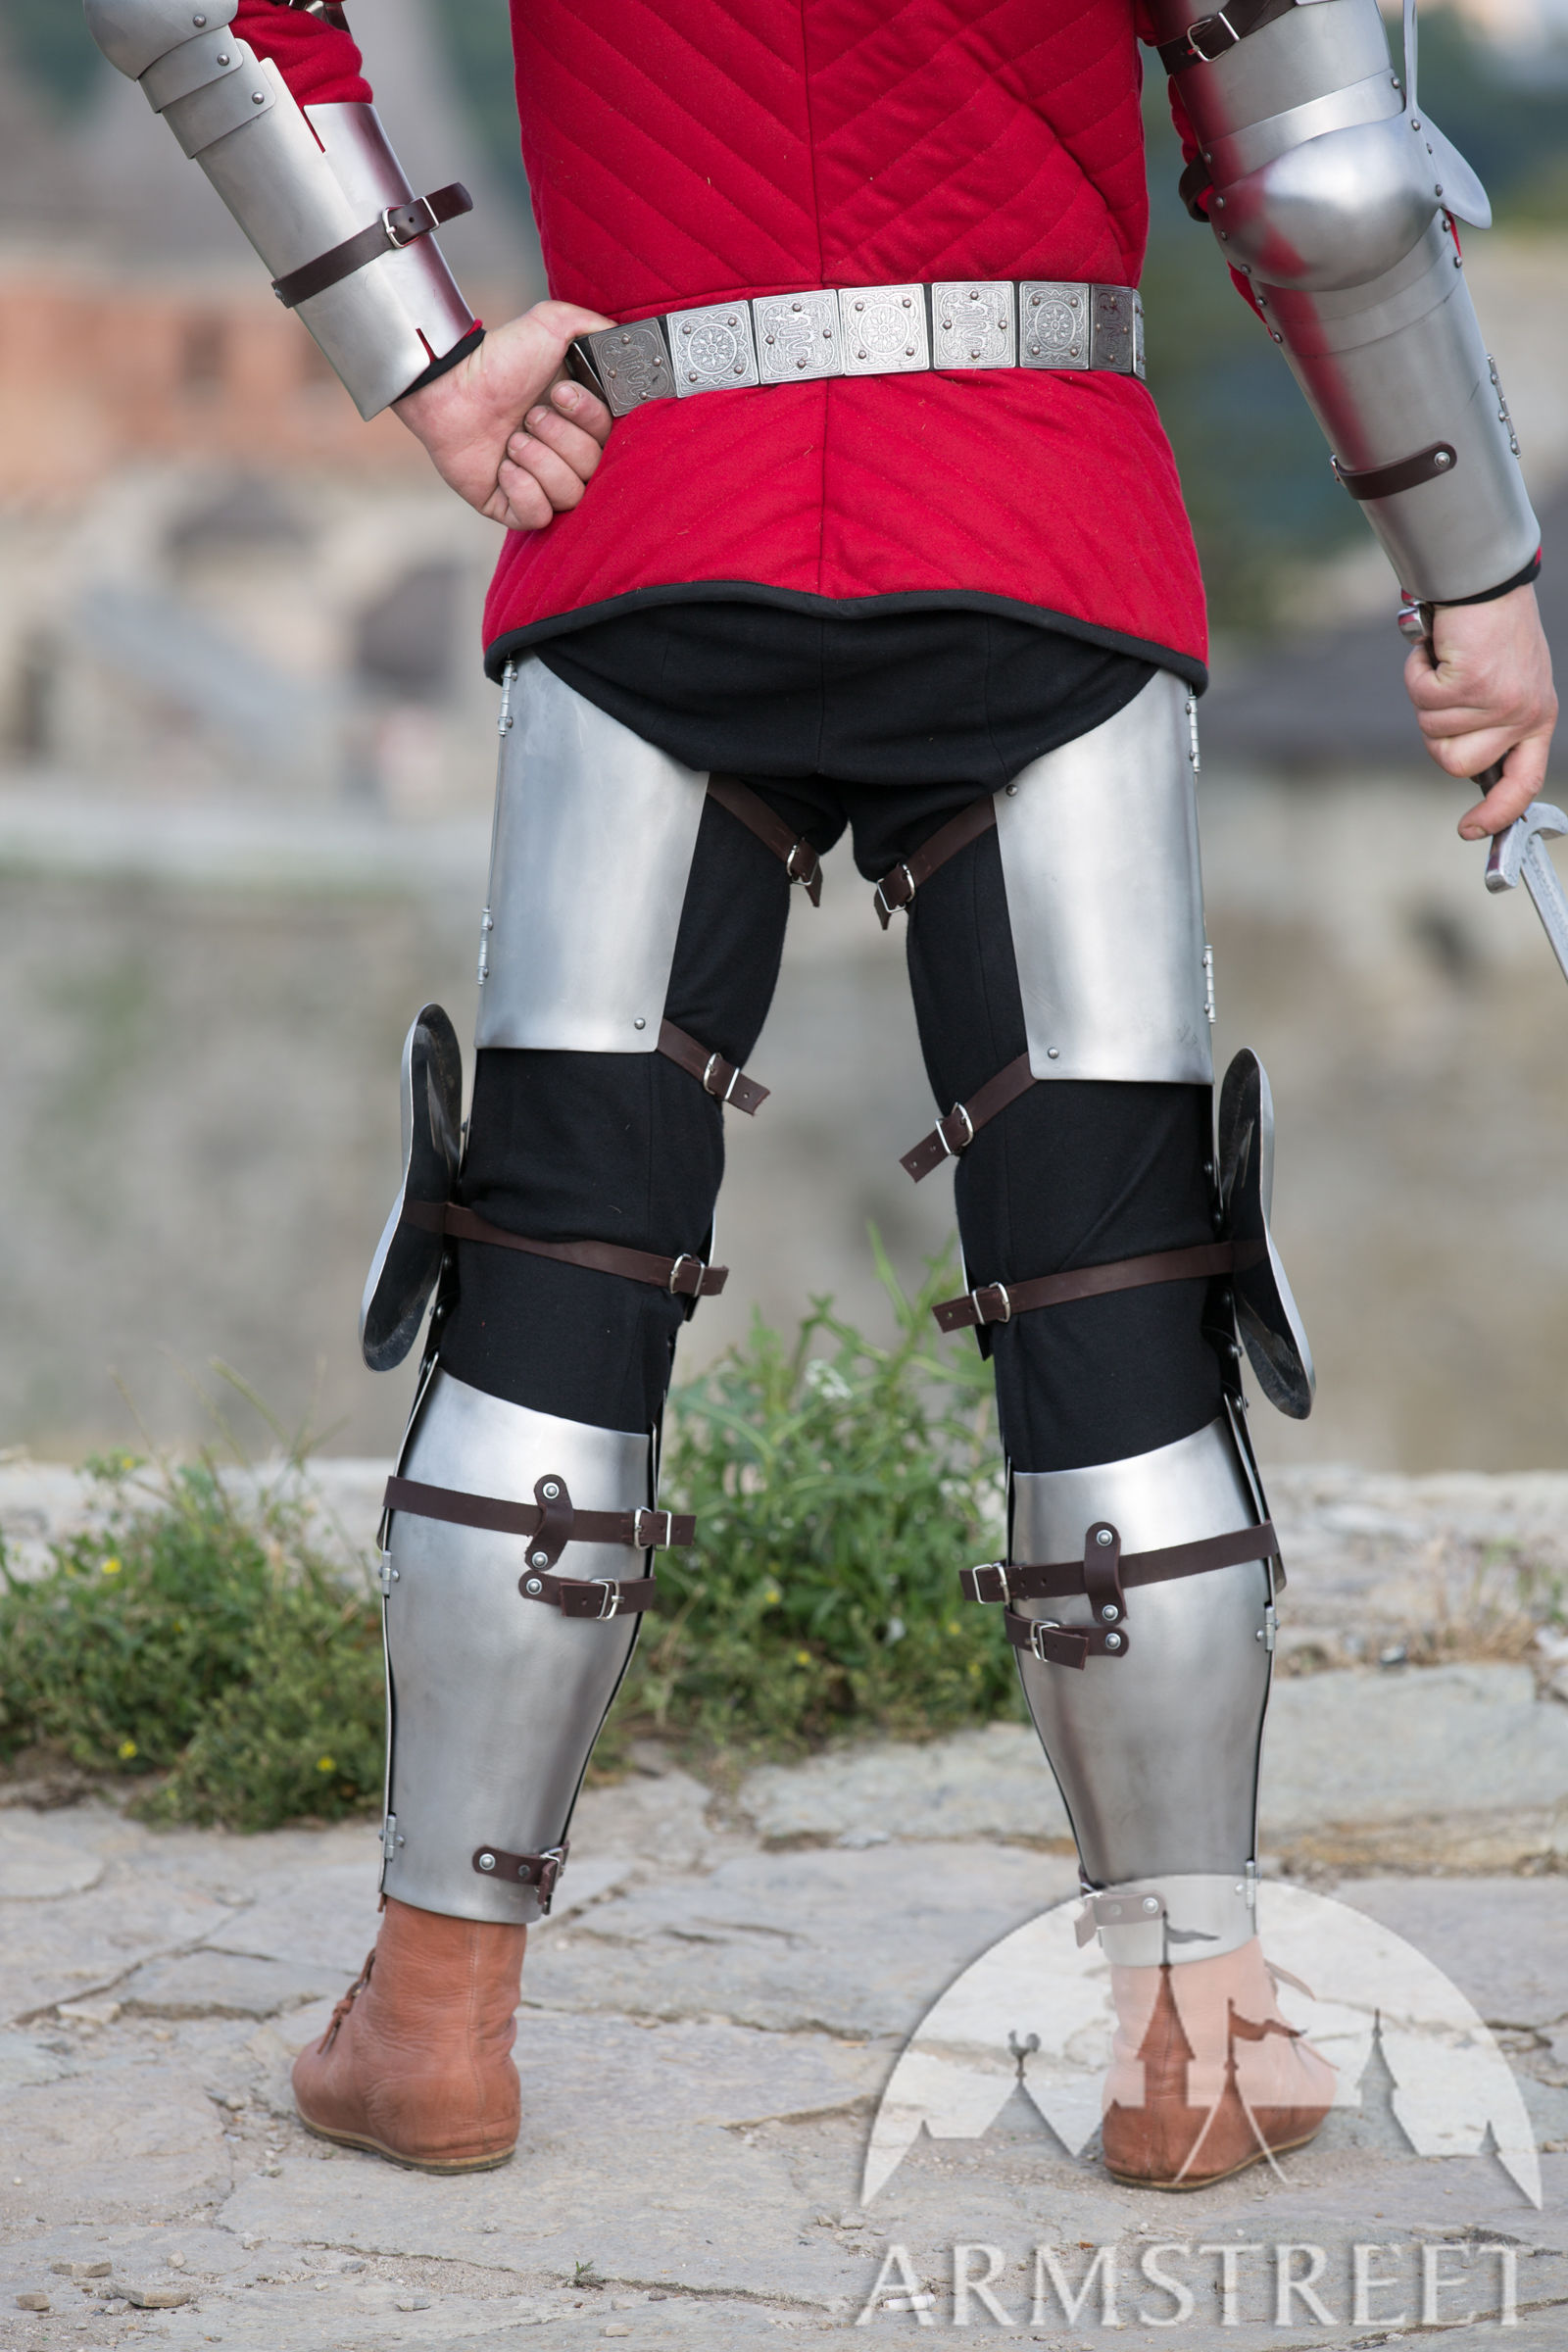 Medieval Leg Legs and Full Round Greaves Set for sale. Available in